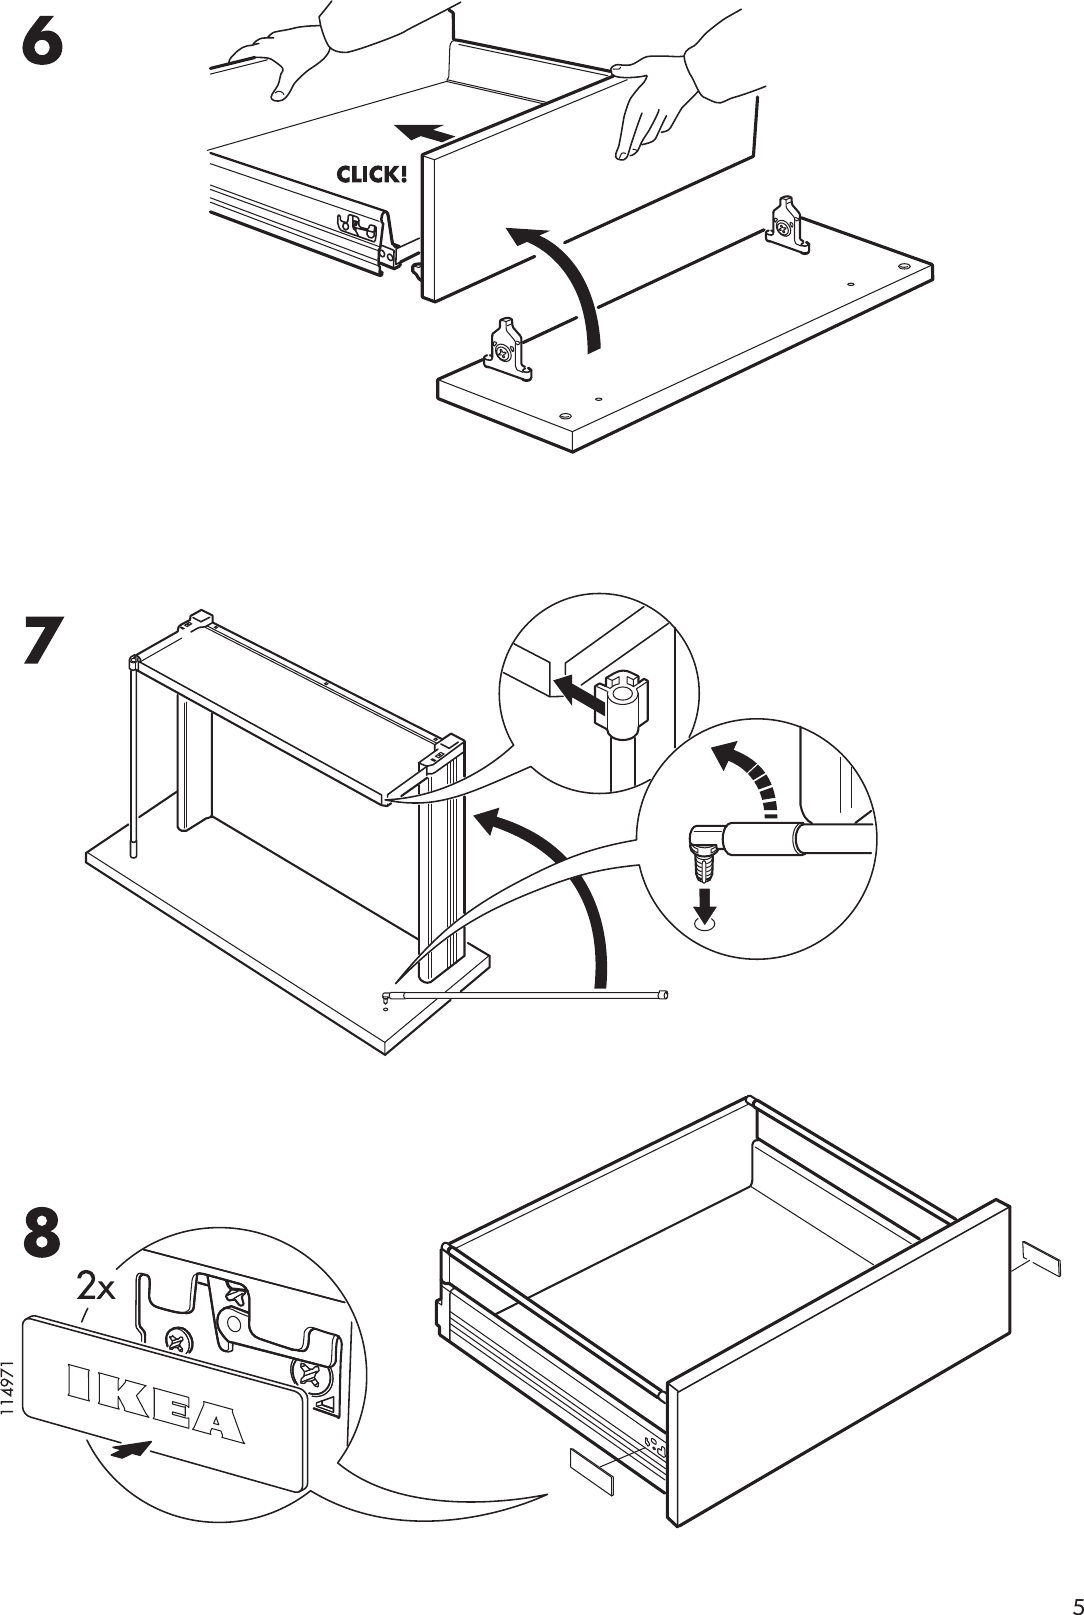 ikea rationell drawer assembly instructions lishavemura